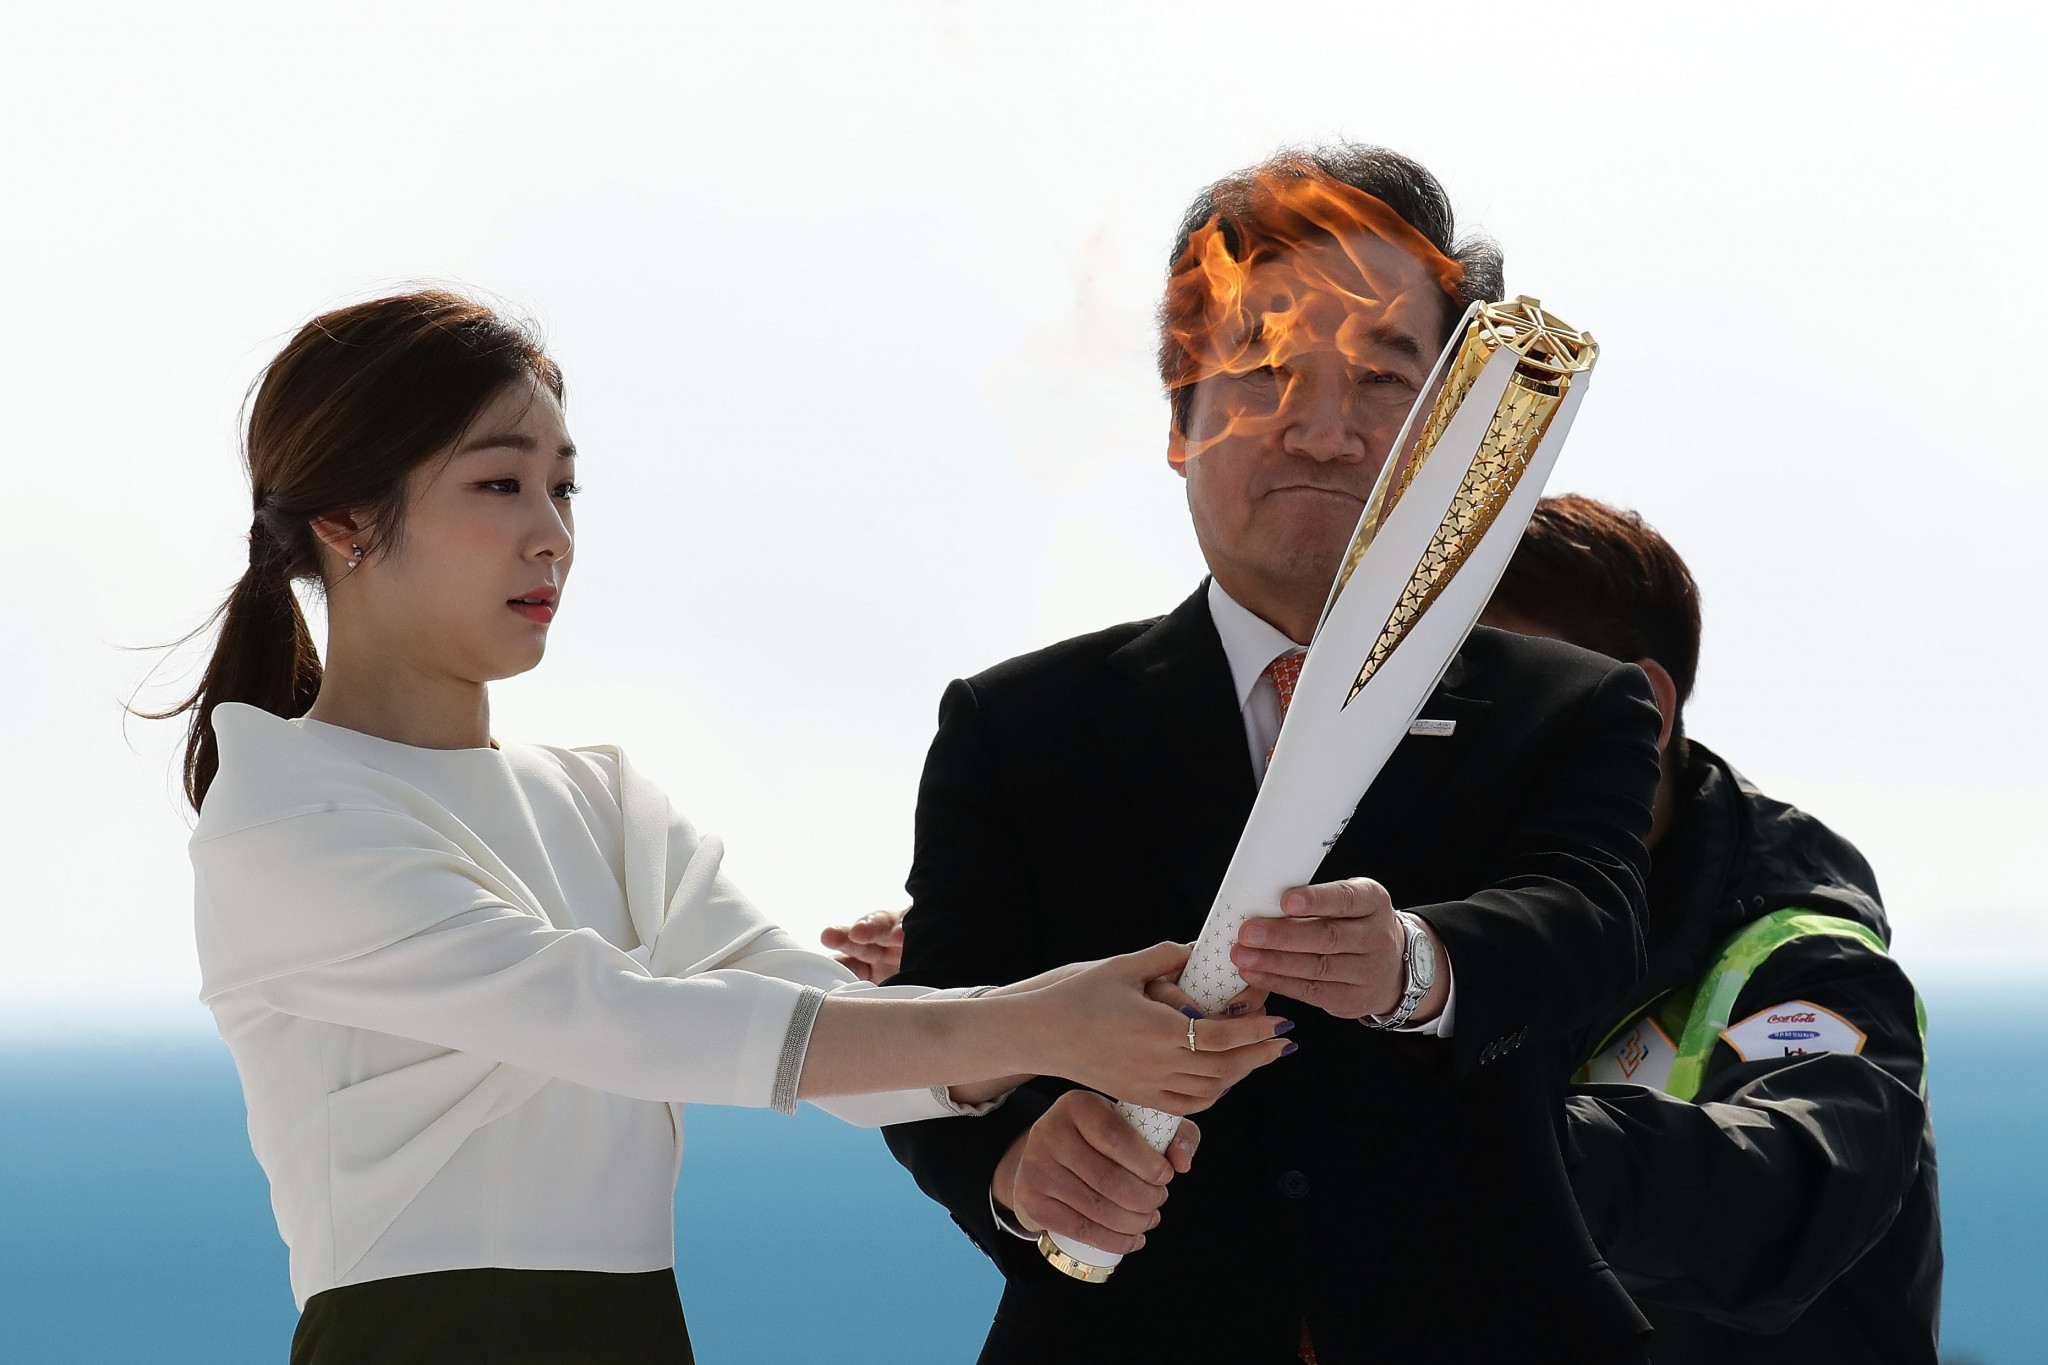 South Korean Prime Minister Lee Nak-yon and 2010 Vancouver Olympic figure skating champion Kim Yu-Na hold the Pyeongchang 2018 Winter Olympics Torch at Incheon International Airport ©Getty Images